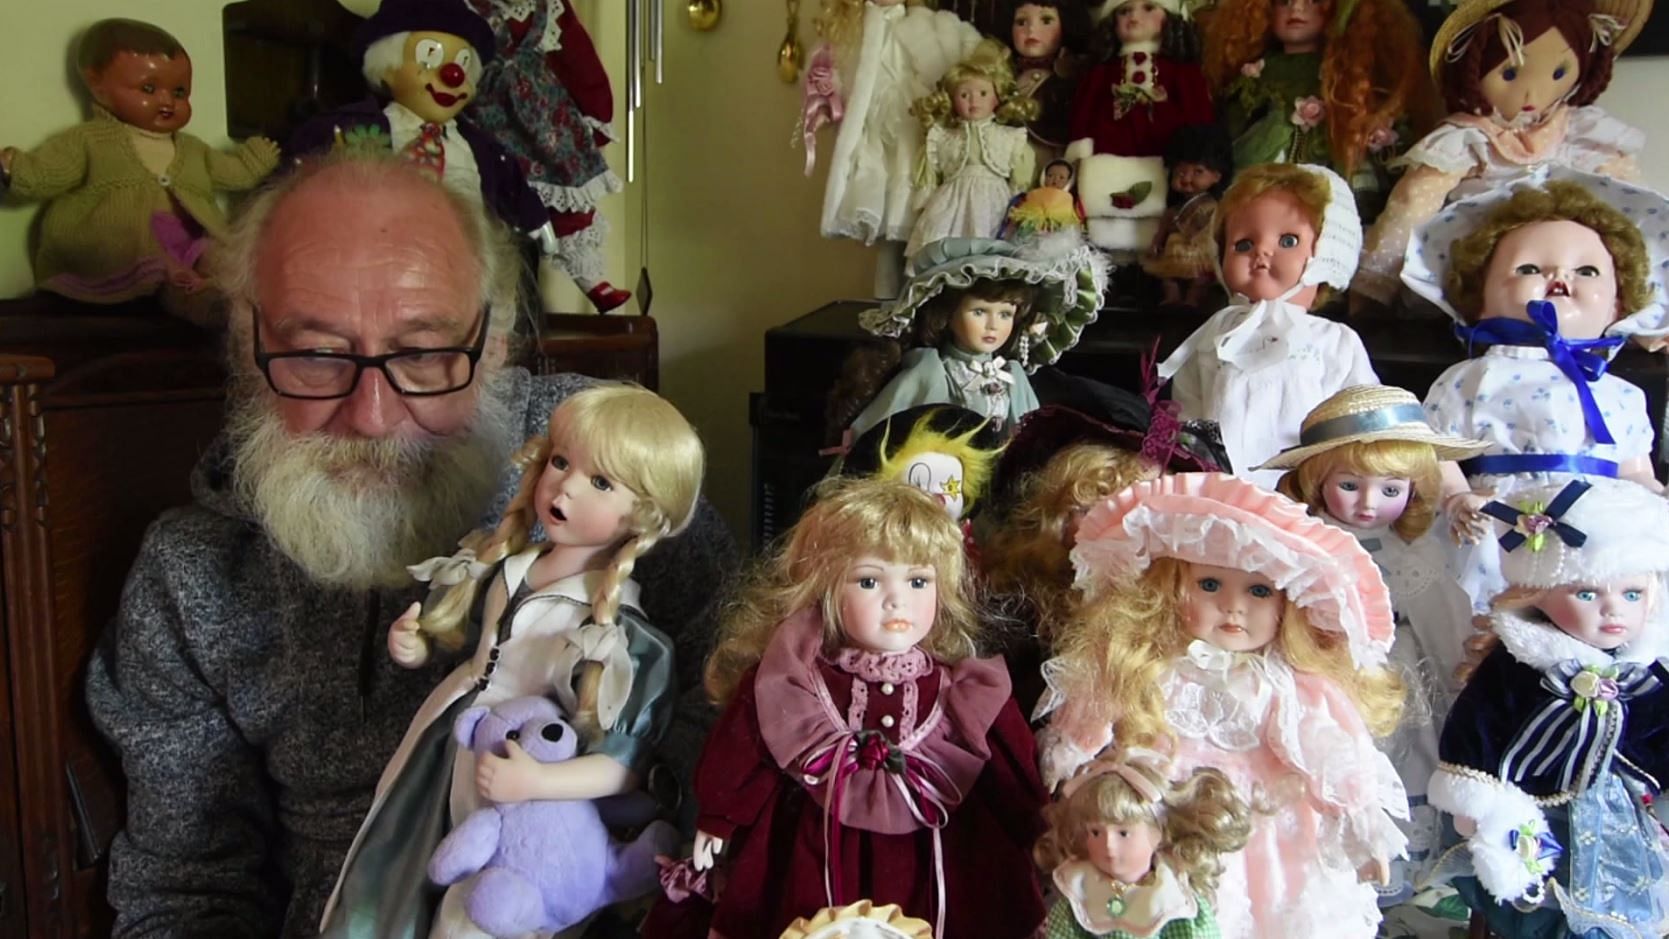 

Barry Collingswood claims he can communicate with his spirited dolls. 